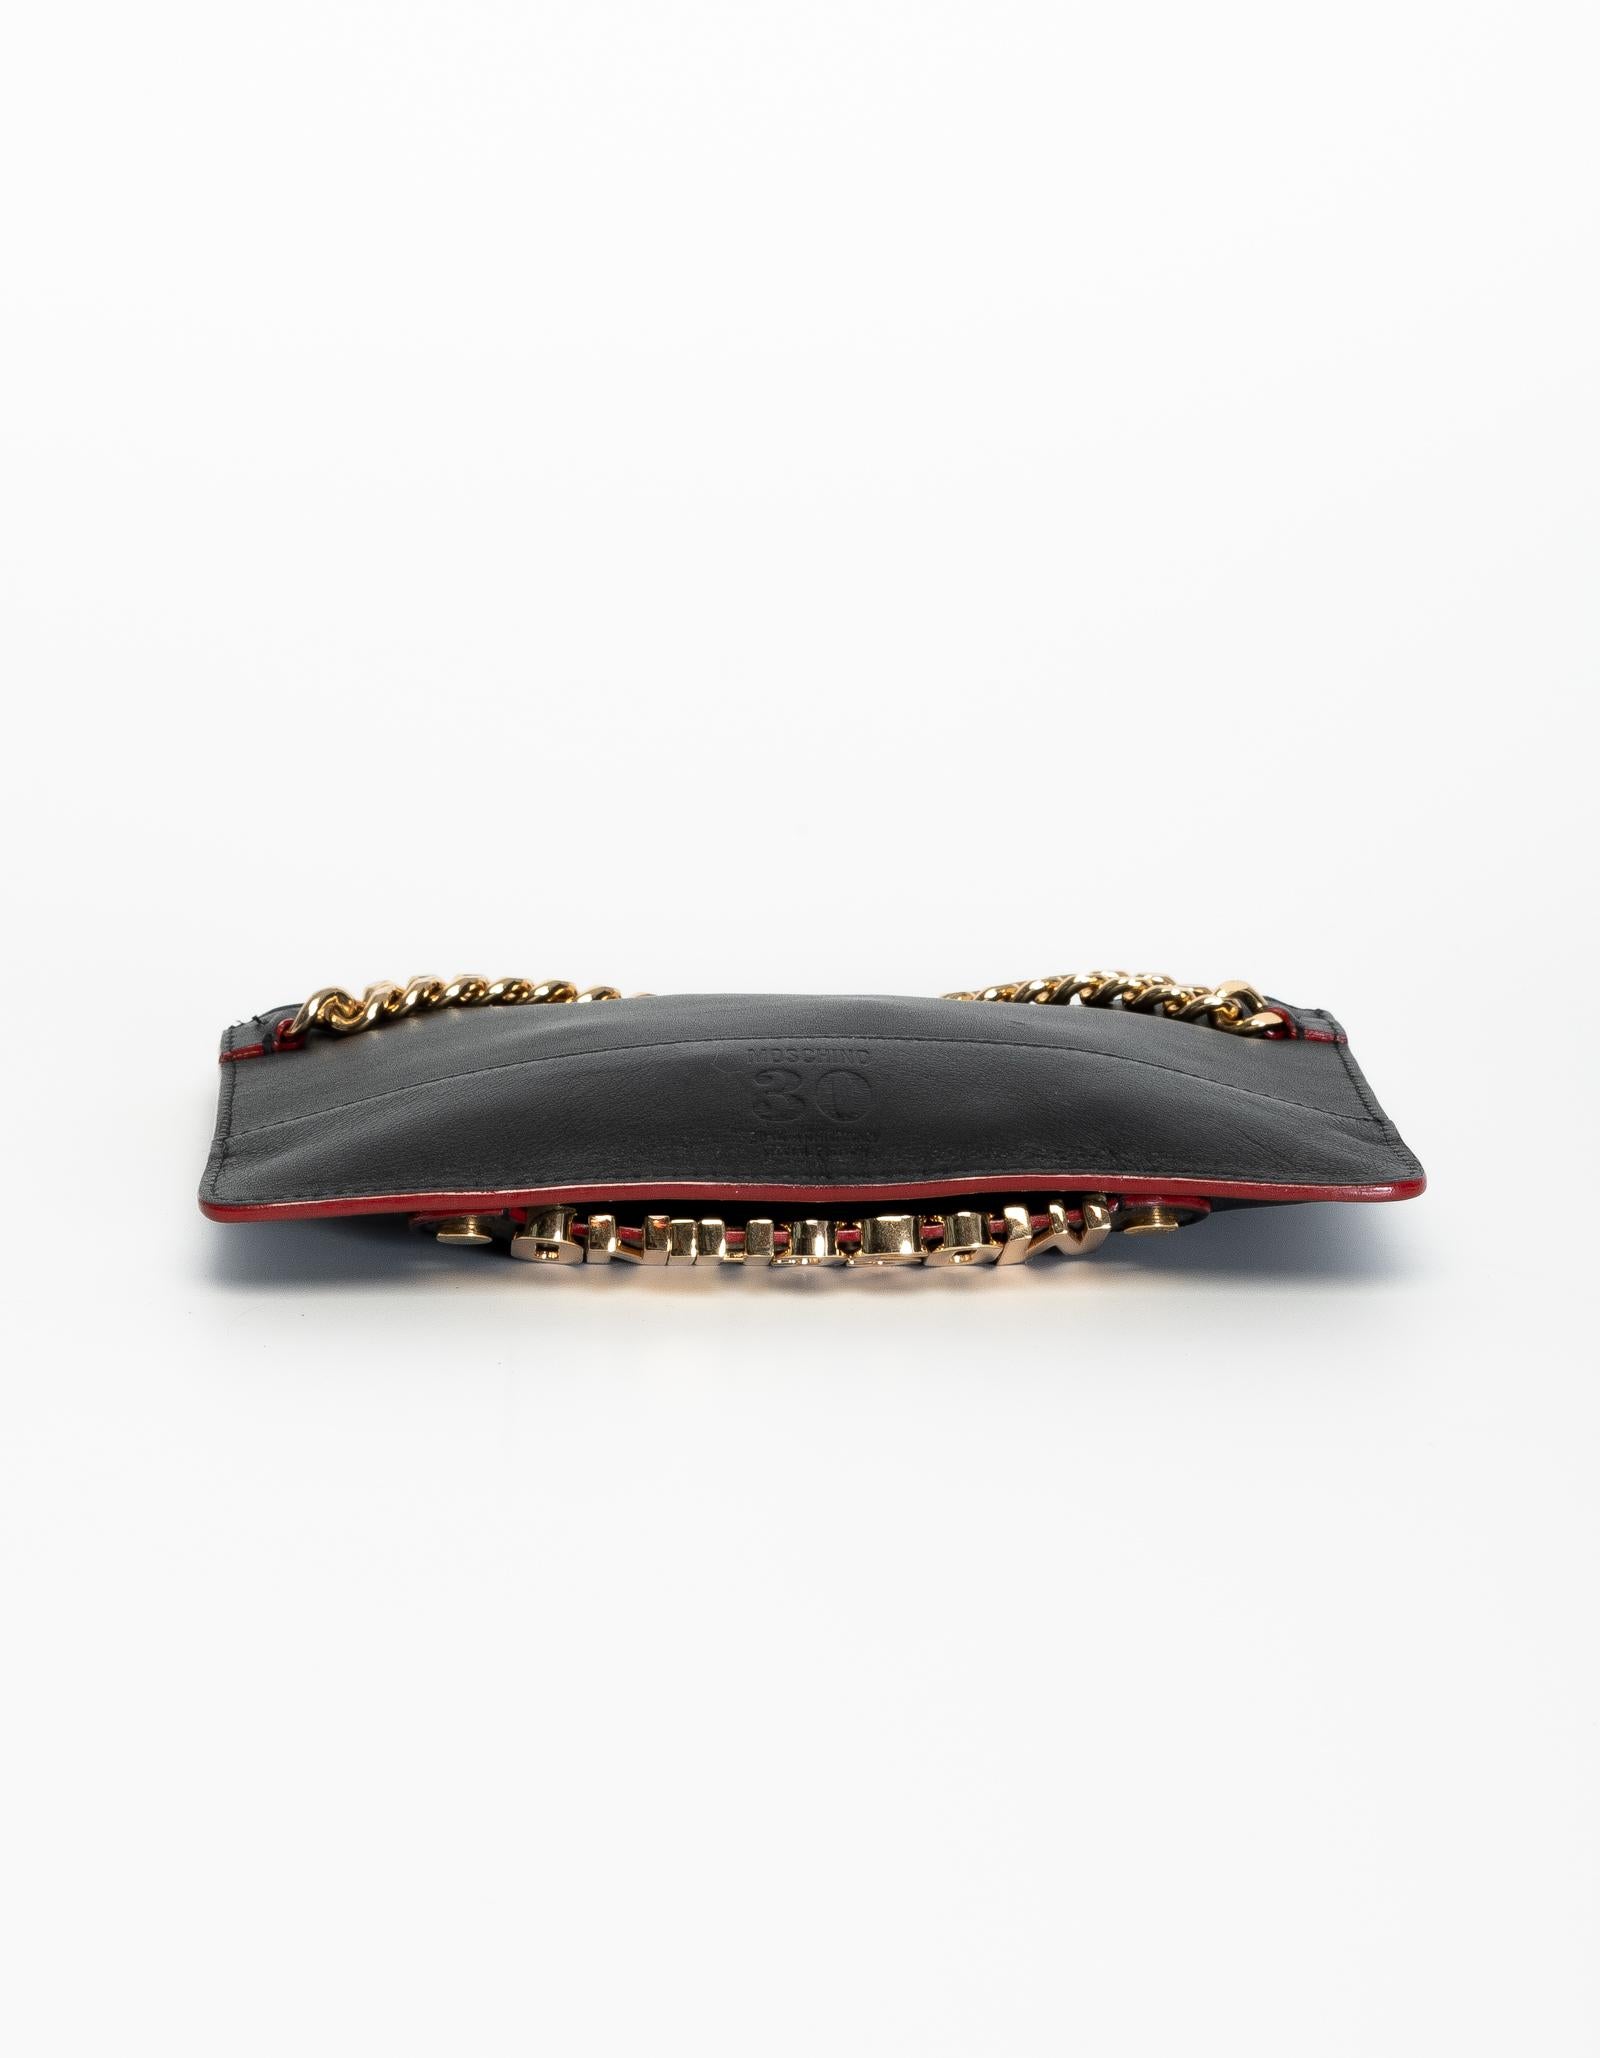 Moschino 30th Anniversary Black Leather Clutch In New Condition For Sale In Montreal, Quebec